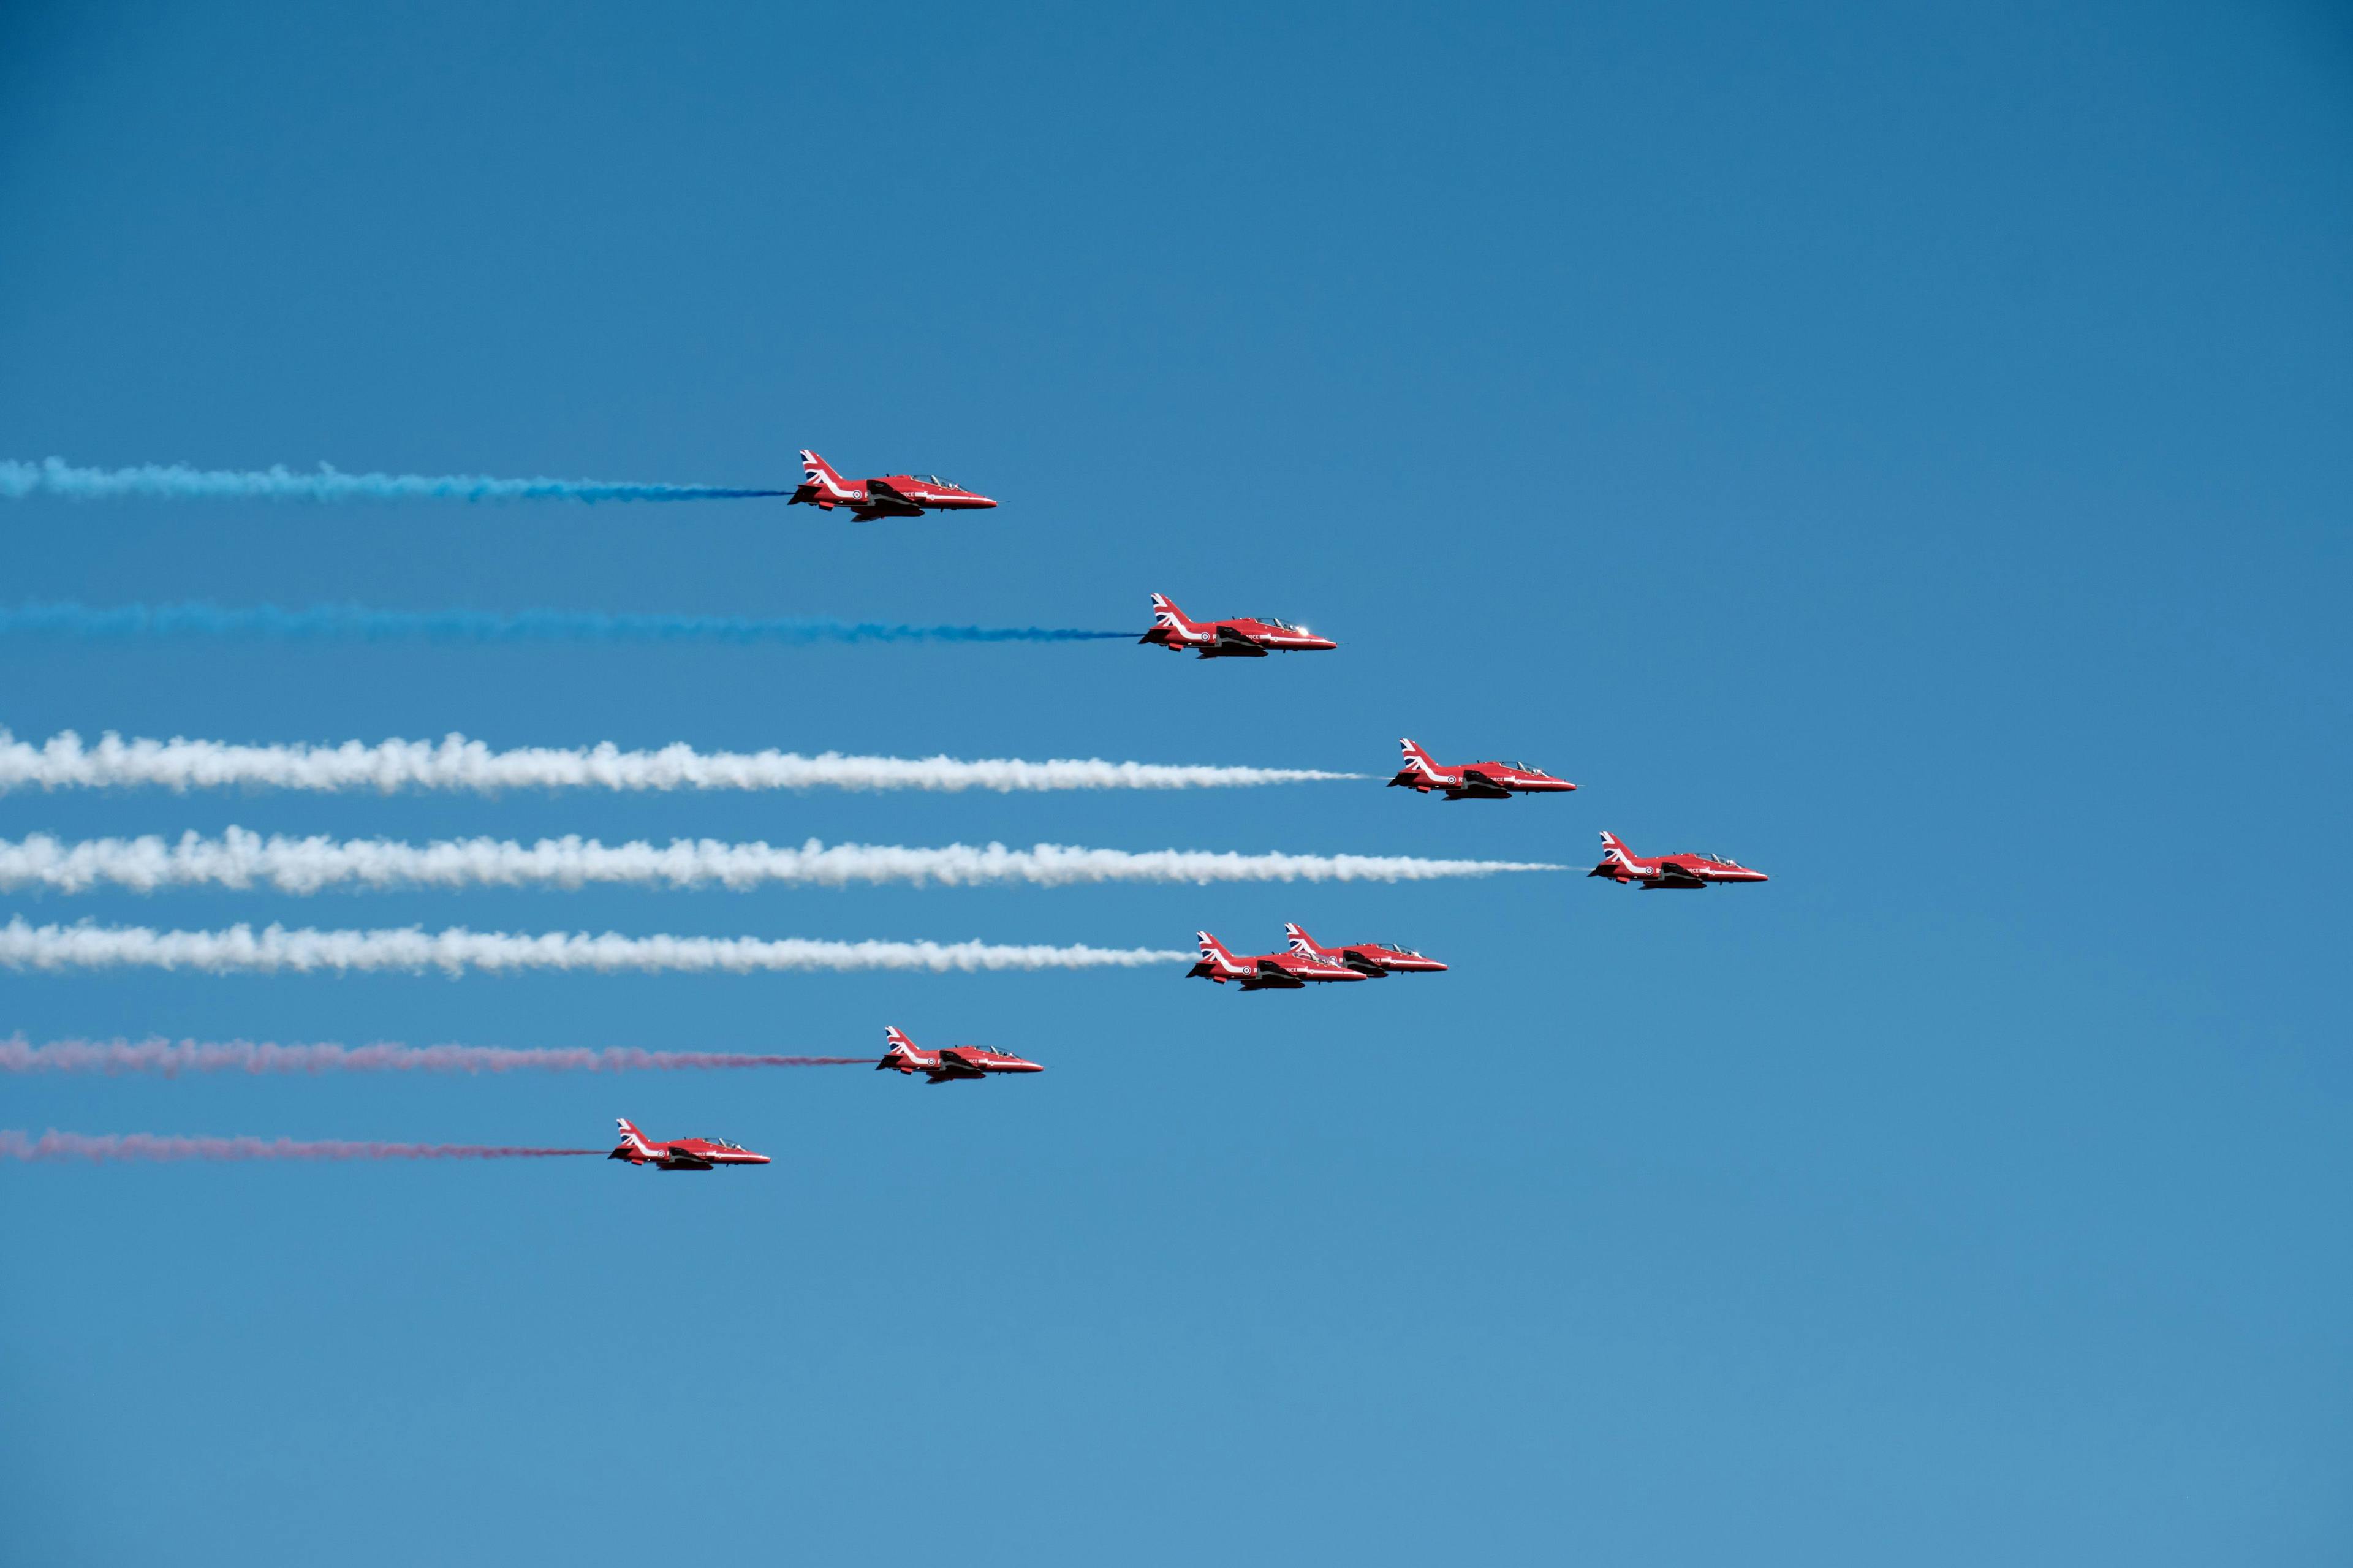 The Red Arrows fly in an arrow formation, with the blue, white and red smoke trailing